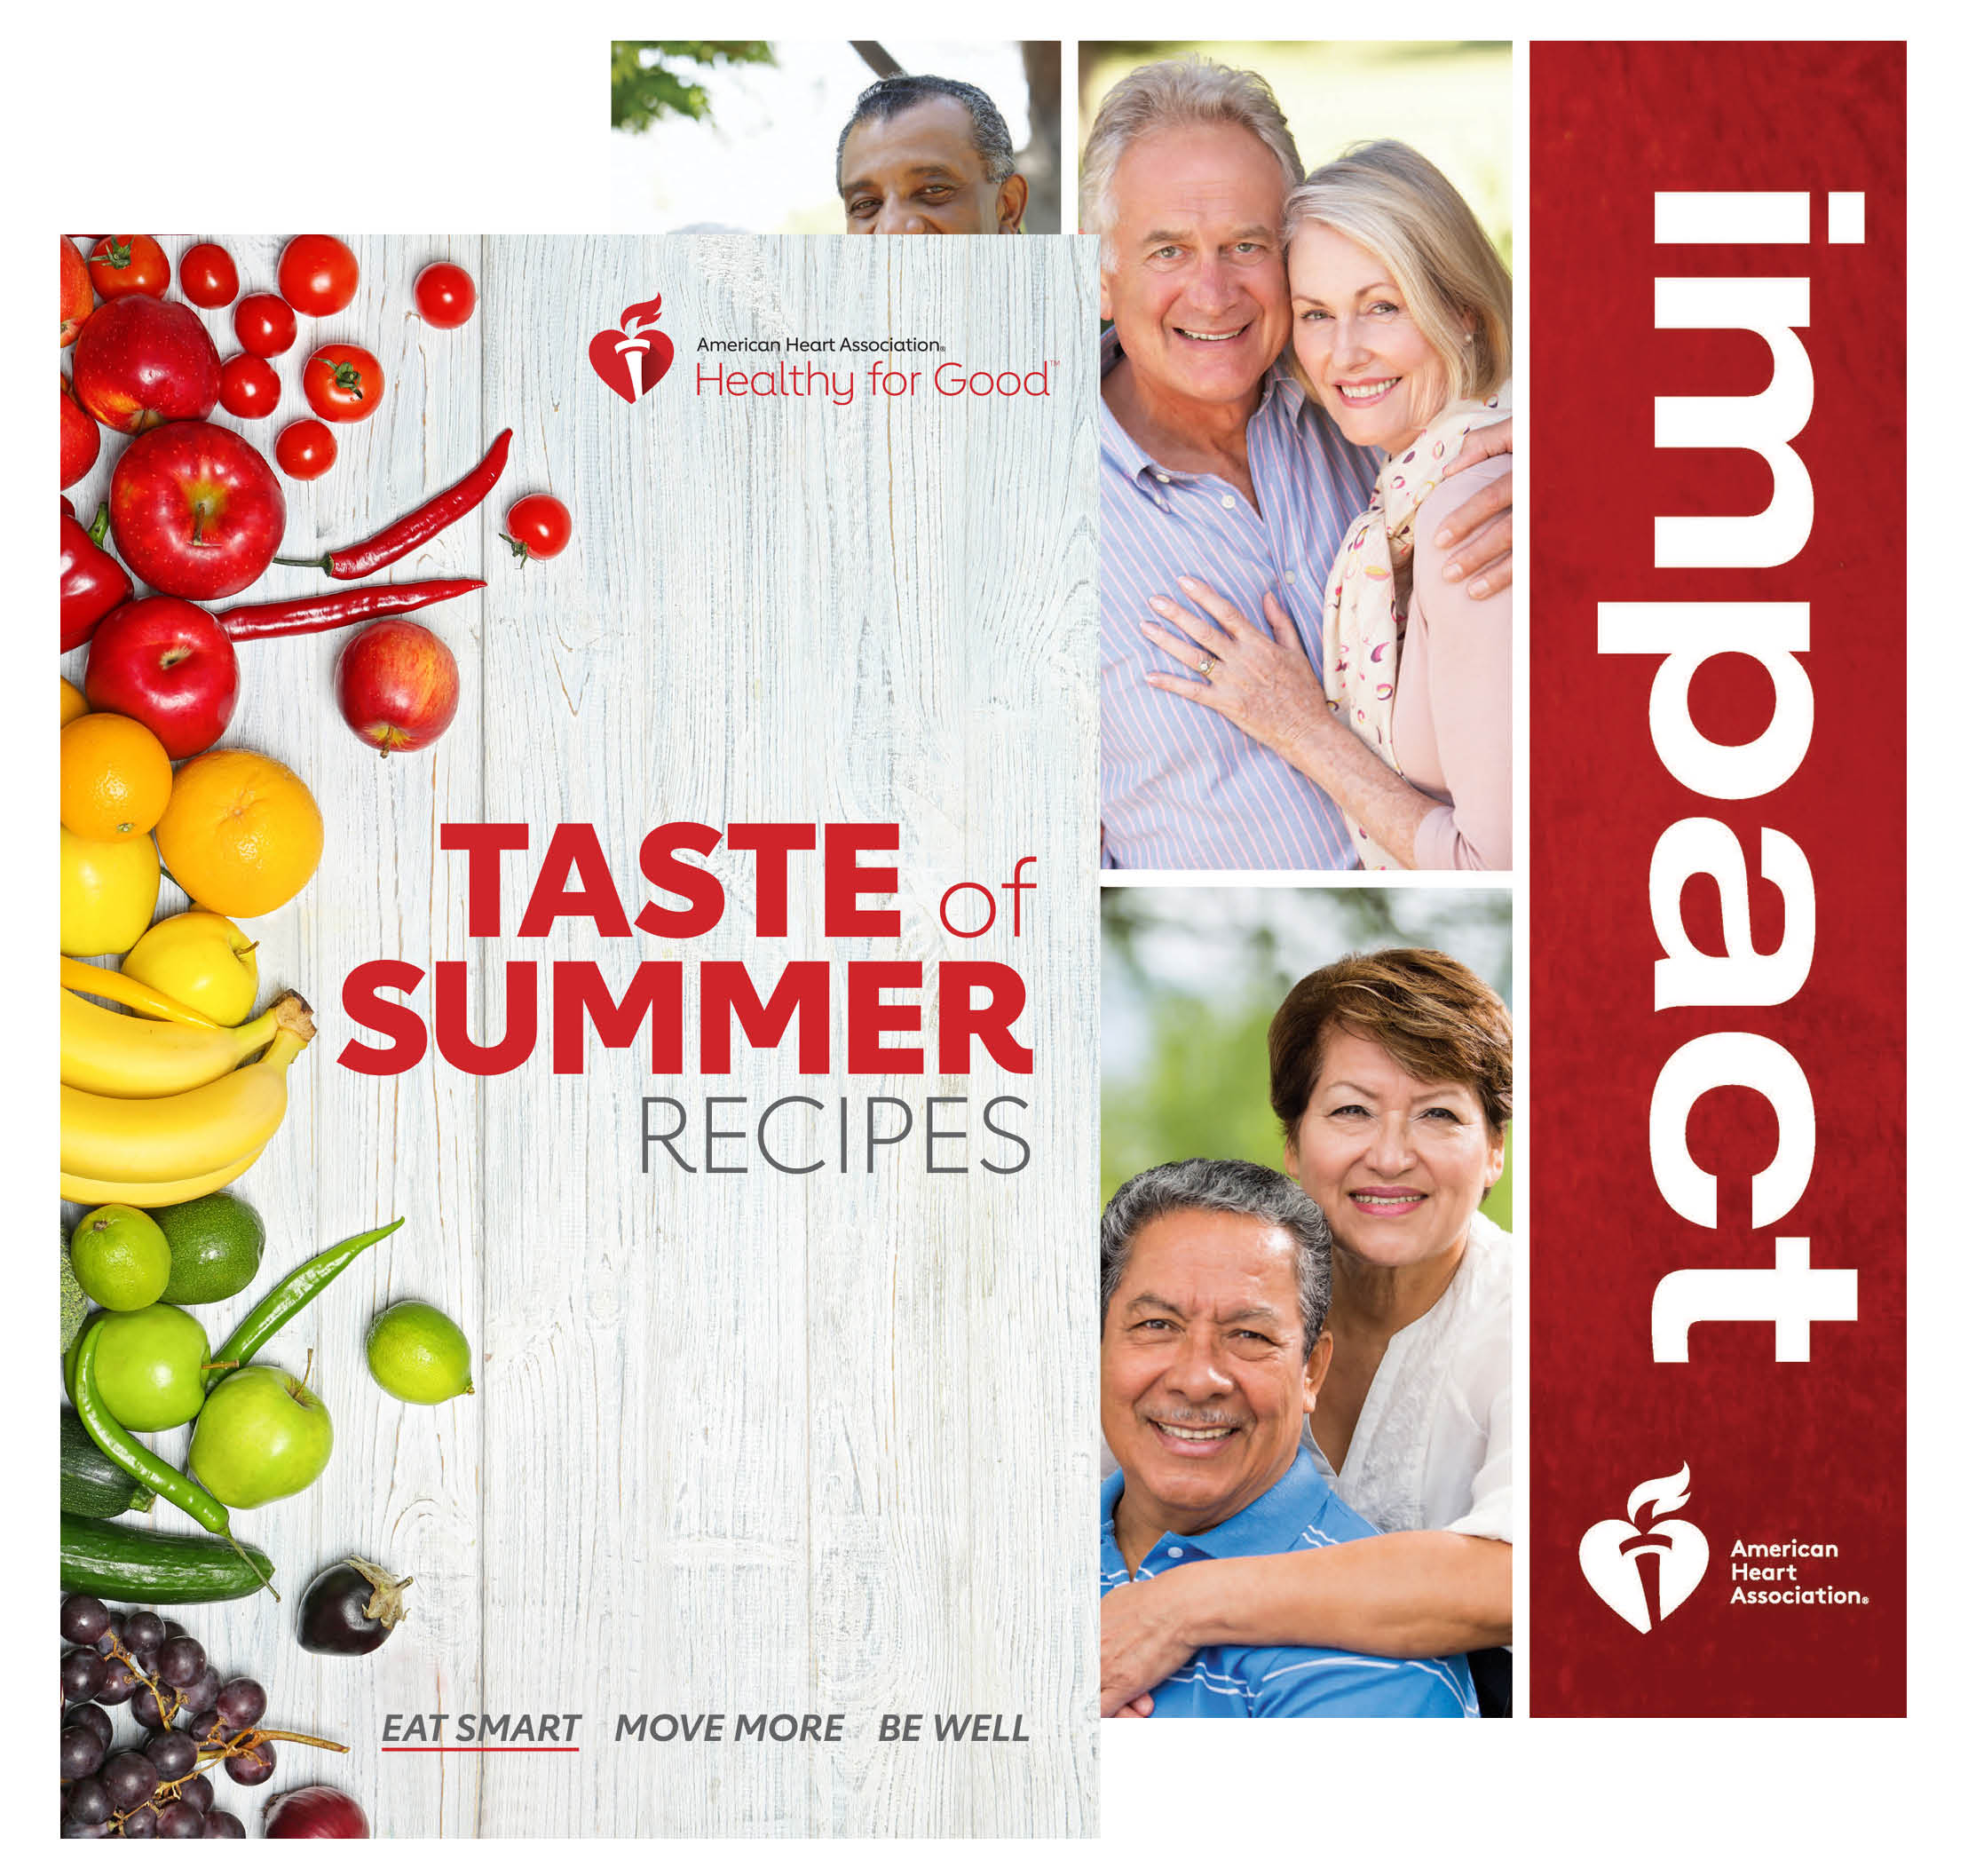 Impact Guide and Taste of Summer Recipe Booklet